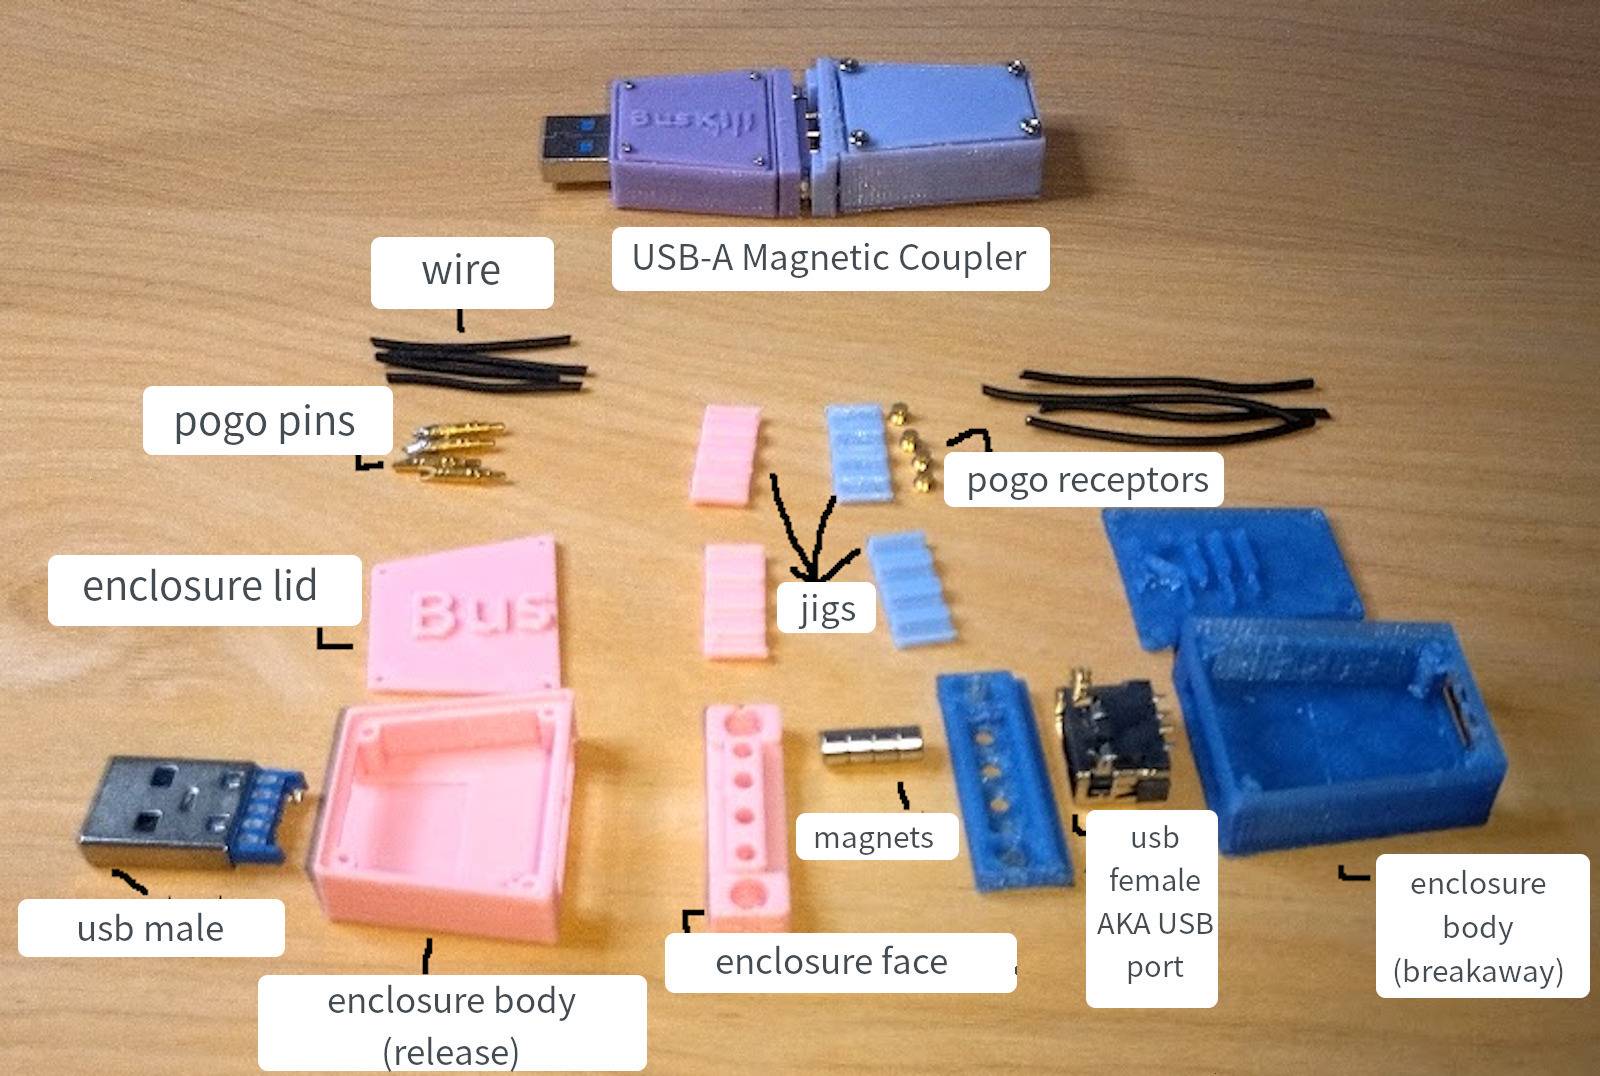 Photo of all the 3D-printing components, with text defining the terminology of each component